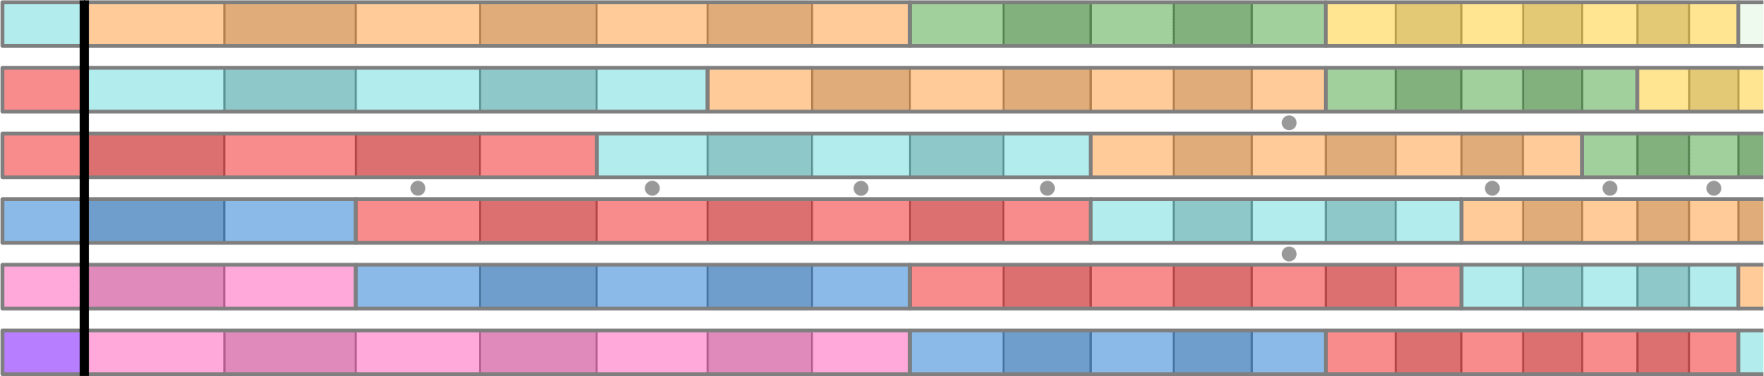 Fretboard with CDE and FGAB note ranges highlighted